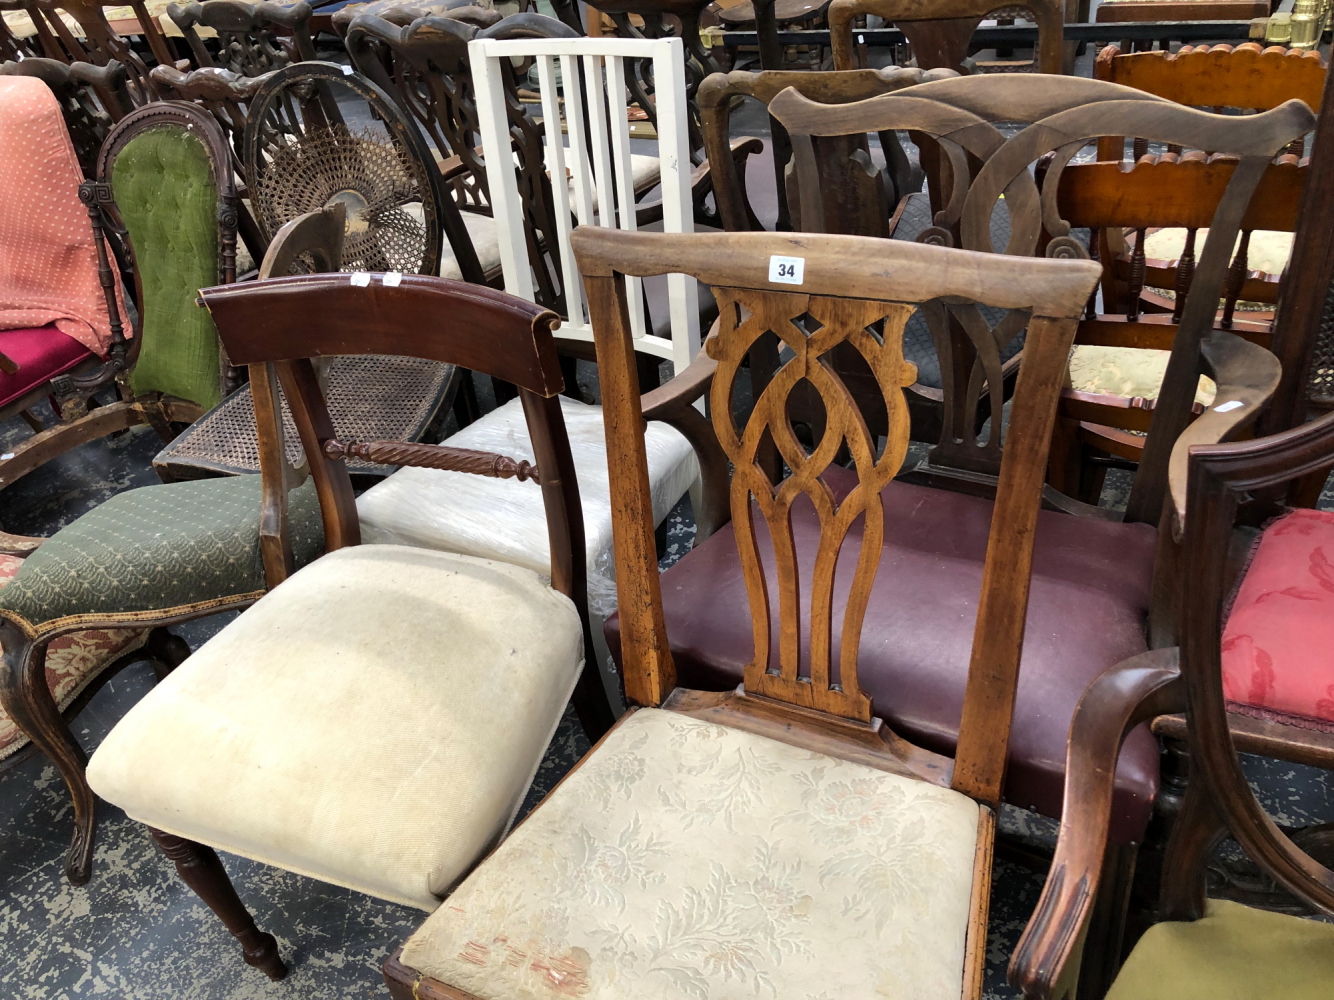 FOUR ANTIQUE DINING CHAIRS INC. TWO ARMCHAIRS AND A FURTHER PAINTED SIDE CHAIR.